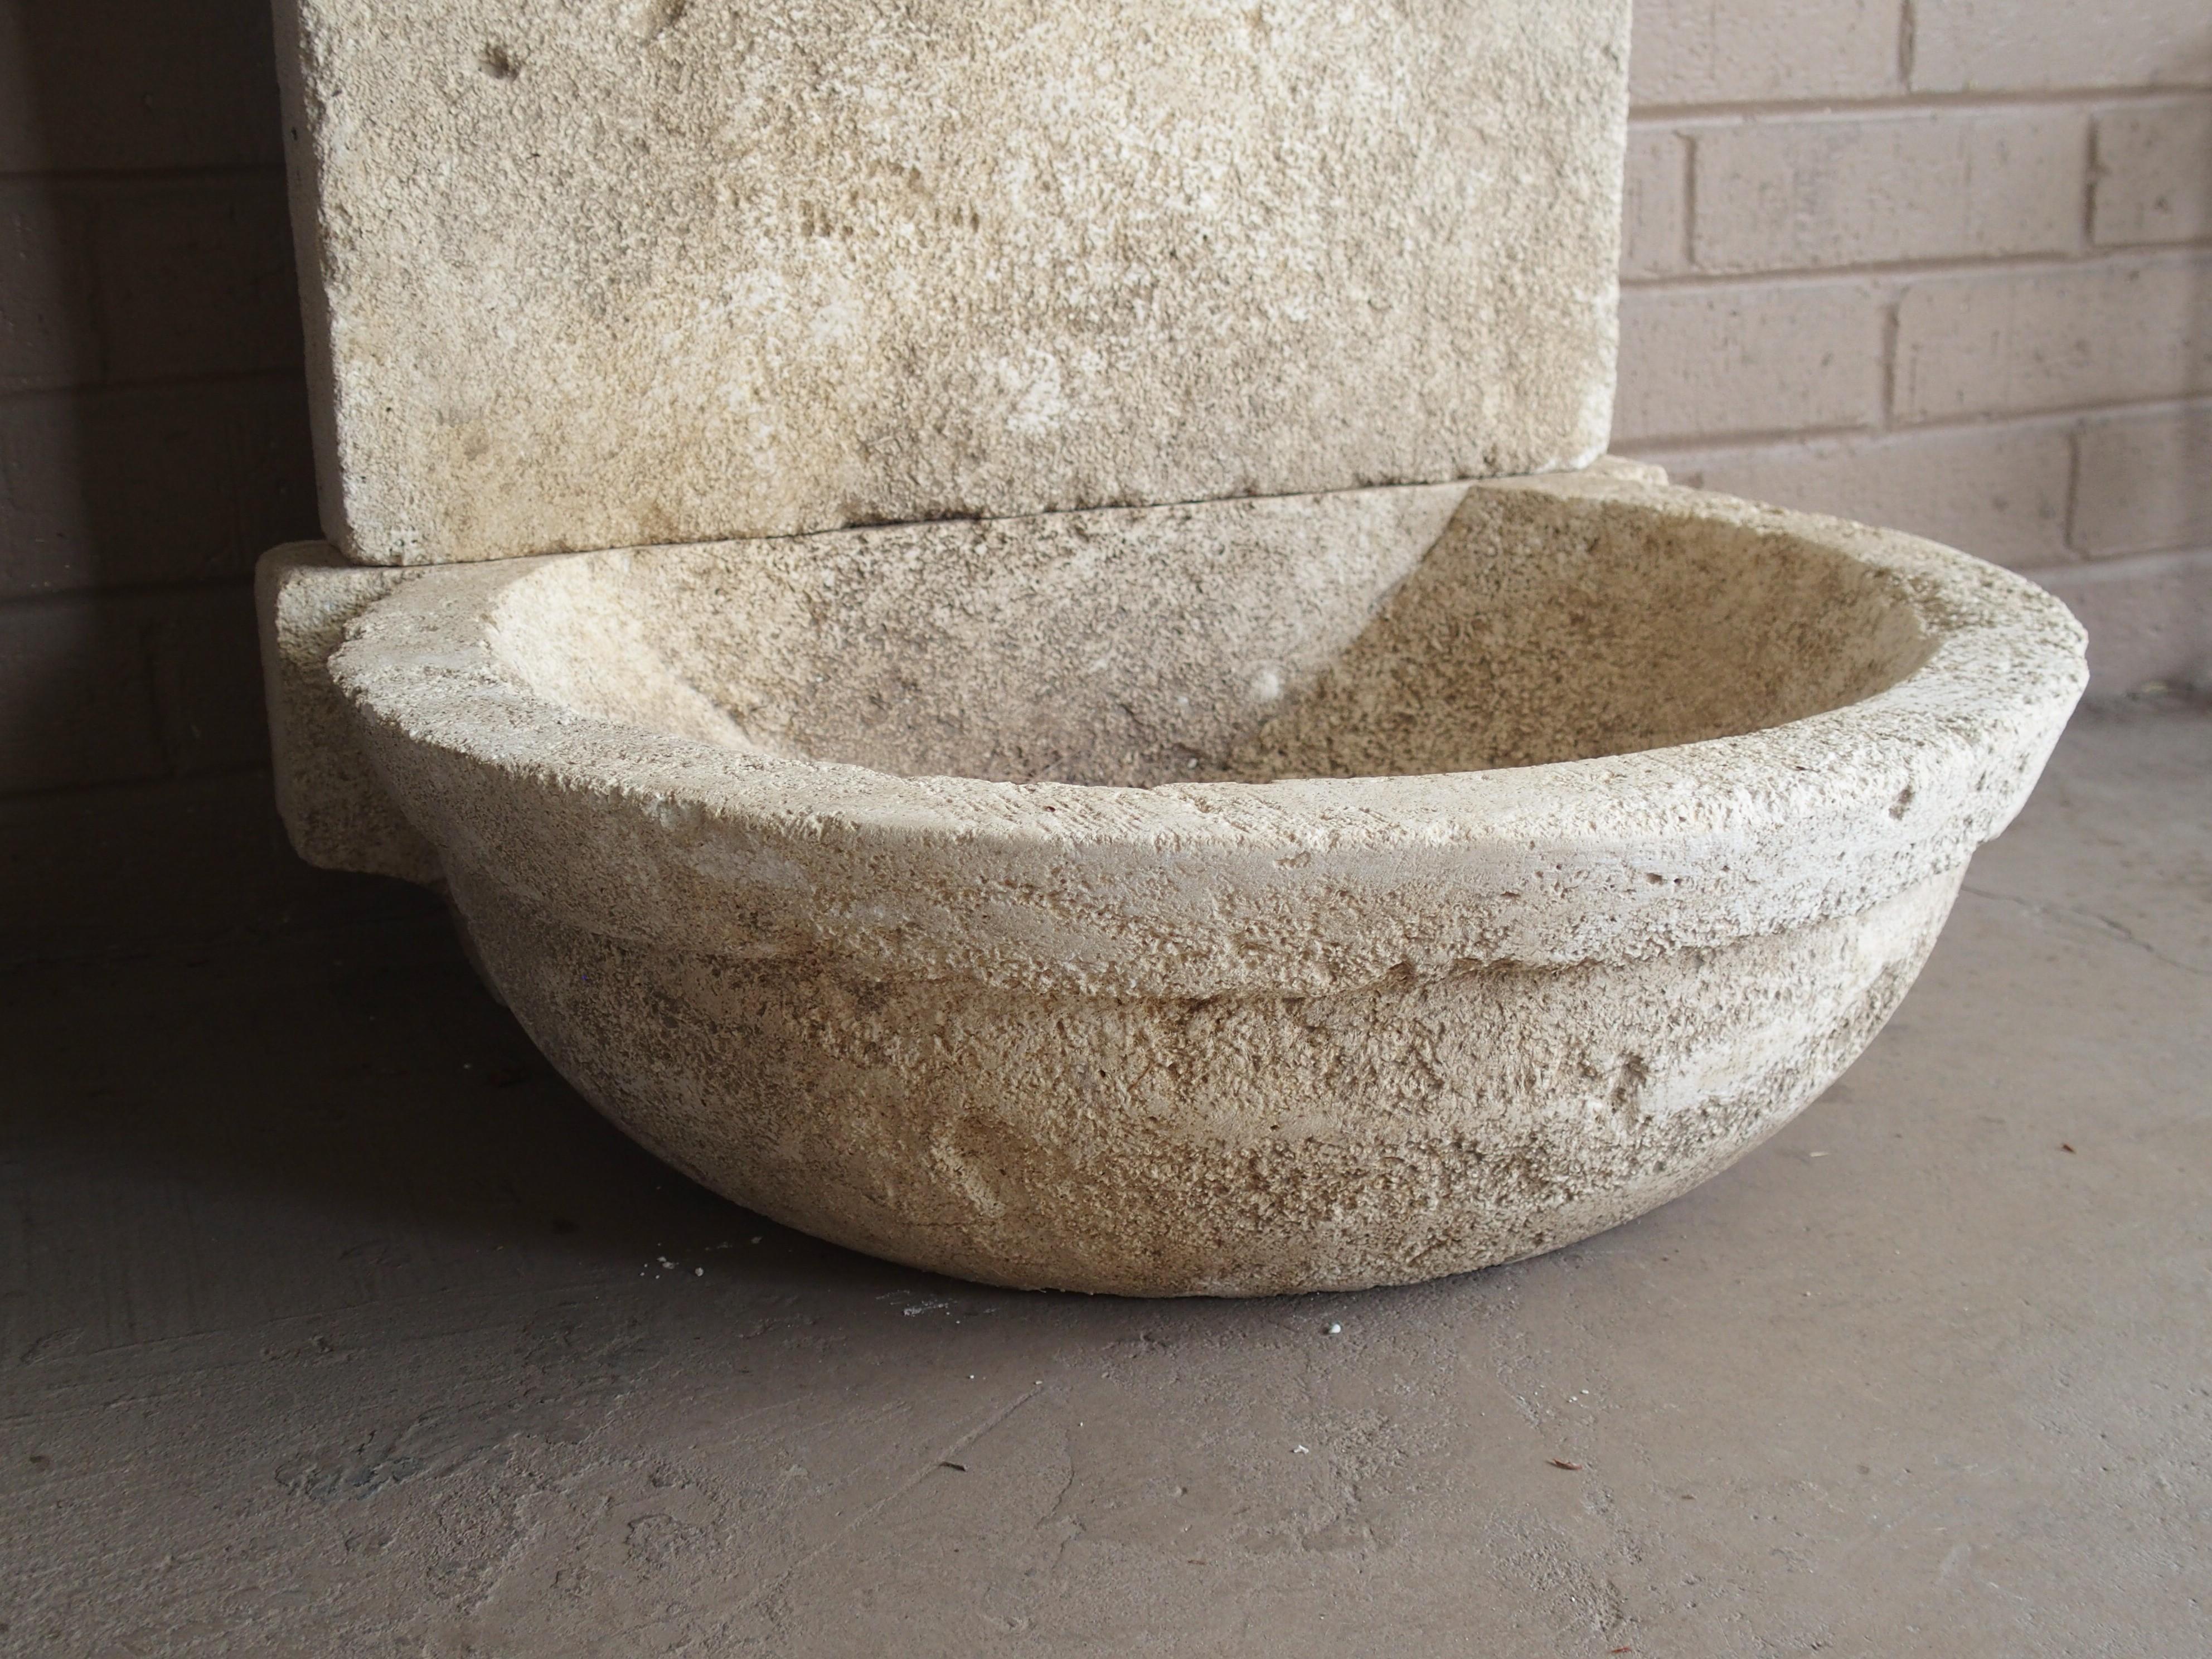 This small hand carved limestone fountain from France has a circular basin with hole for drainage. The basin extends out from a vertical back support, and on top of this, is a carved upper portion with sloped shoulders. The rusted spout slots into a